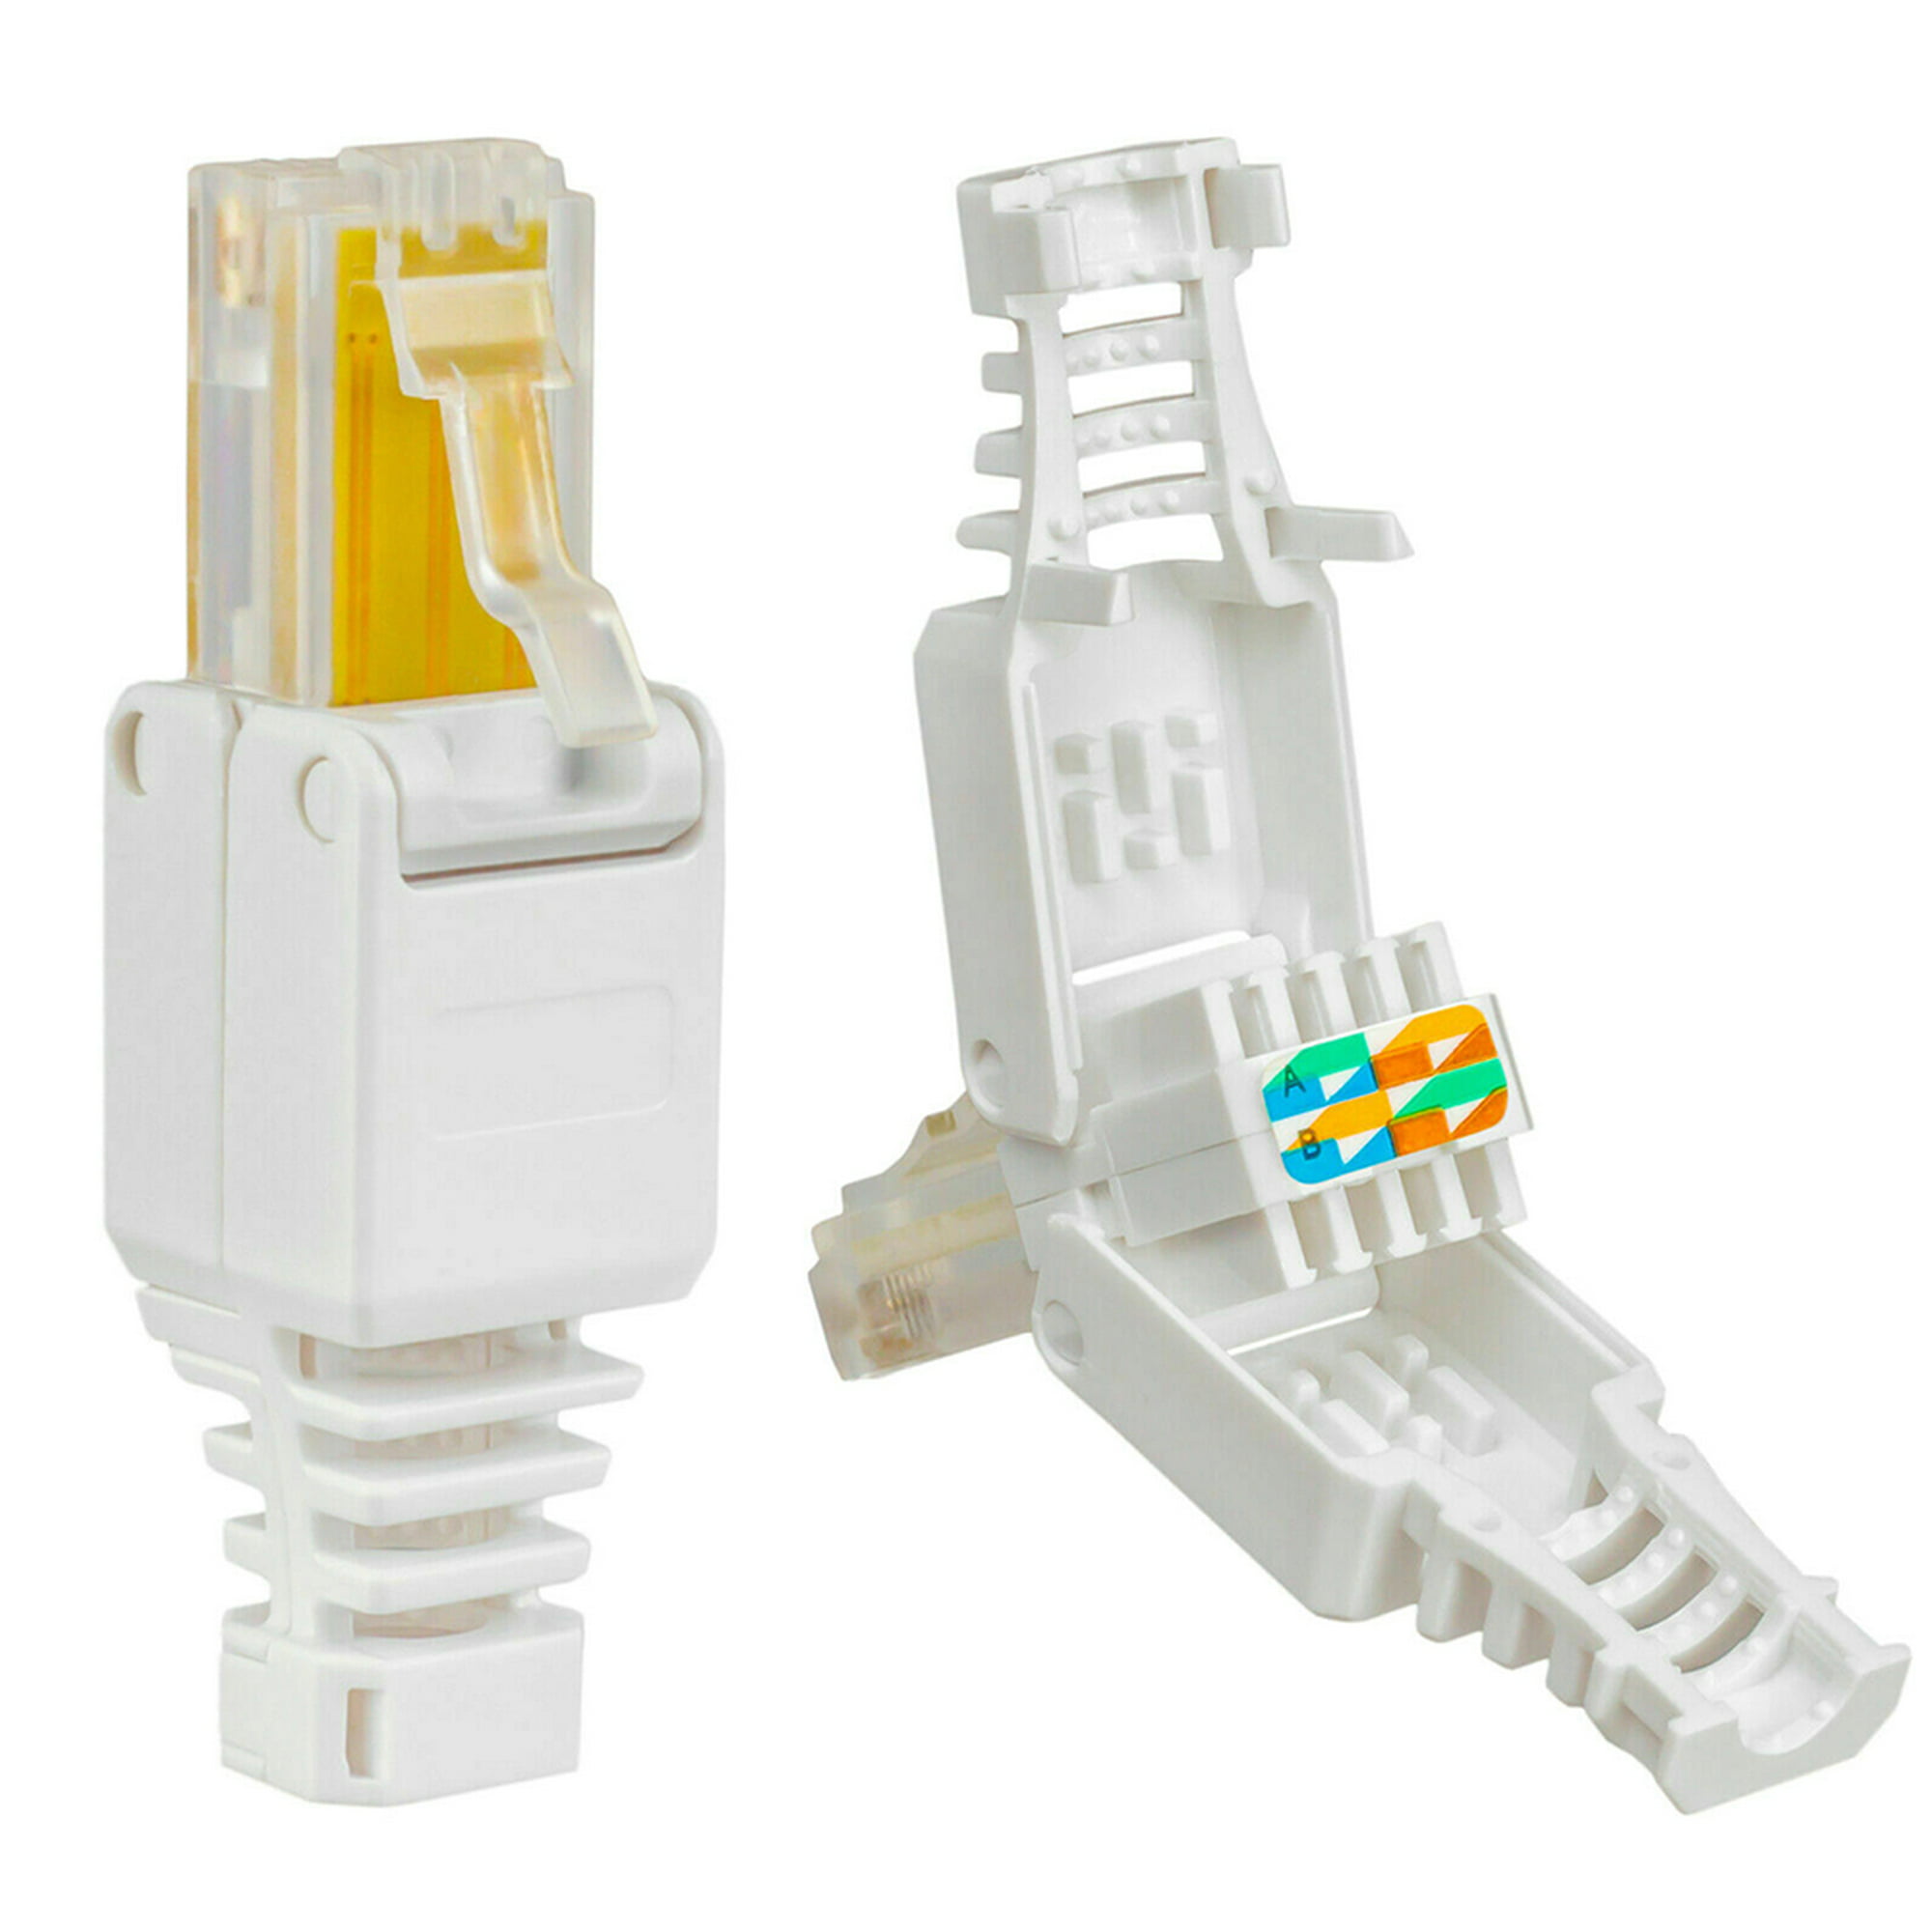 Rj45 Cat6 Easy Install Ethernet Cable Cord Modular Connector Plug Head Network Clear